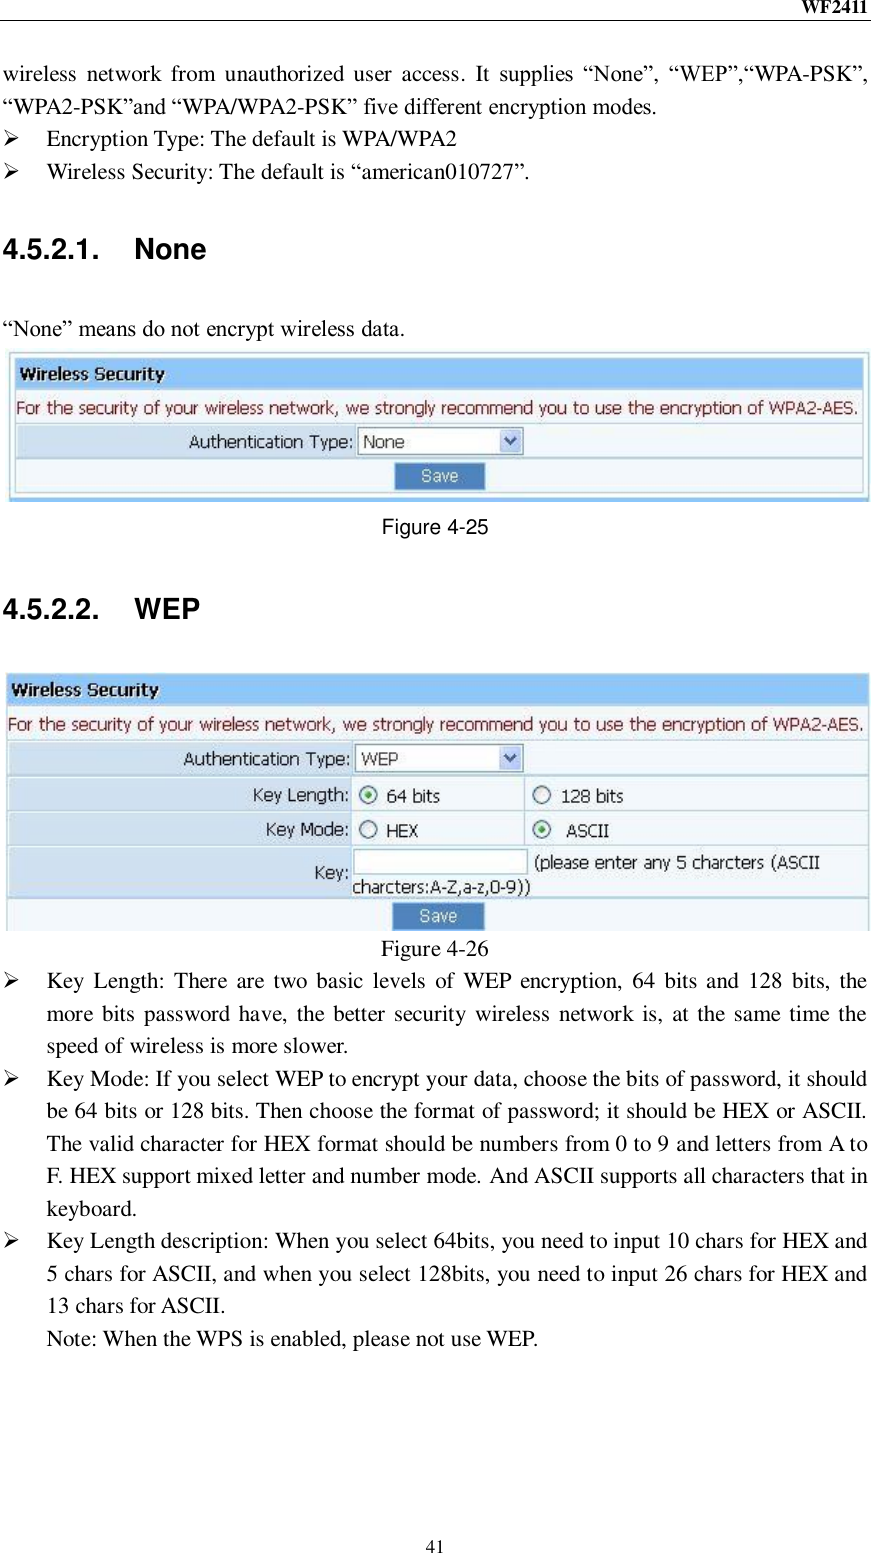 WF2411  41 wireless  network  from  unauthorized user  access.  It  supplies  “None”, “WEP”,“WPA-PSK”, “WPA2-PSK”and “WPA/WPA2-PSK” five different encryption modes.  Encryption Type: The default is WPA/WPA2  Wireless Security: The default is “american010727”. 4.5.2.1.  None “None” means do not encrypt wireless data.  Figure 4-25 4.5.2.2.  WEP  Figure 4-26  Key Length:  There  are two  basic  levels  of  WEP  encryption,  64  bits and 128  bits, the more bits password have, the better  security wireless network is, at the same time the speed of wireless is more slower.  Key Mode: If you select WEP to encrypt your data, choose the bits of password, it should be 64 bits or 128 bits. Then choose the format of password; it should be HEX or ASCII. The valid character for HEX format should be numbers from 0 to 9 and letters from A to F. HEX support mixed letter and number mode. And ASCII supports all characters that in keyboard.  Key Length description: When you select 64bits, you need to input 10 chars for HEX and 5 chars for ASCII, and when you select 128bits, you need to input 26 chars for HEX and 13 chars for ASCII. Note: When the WPS is enabled, please not use WEP. 